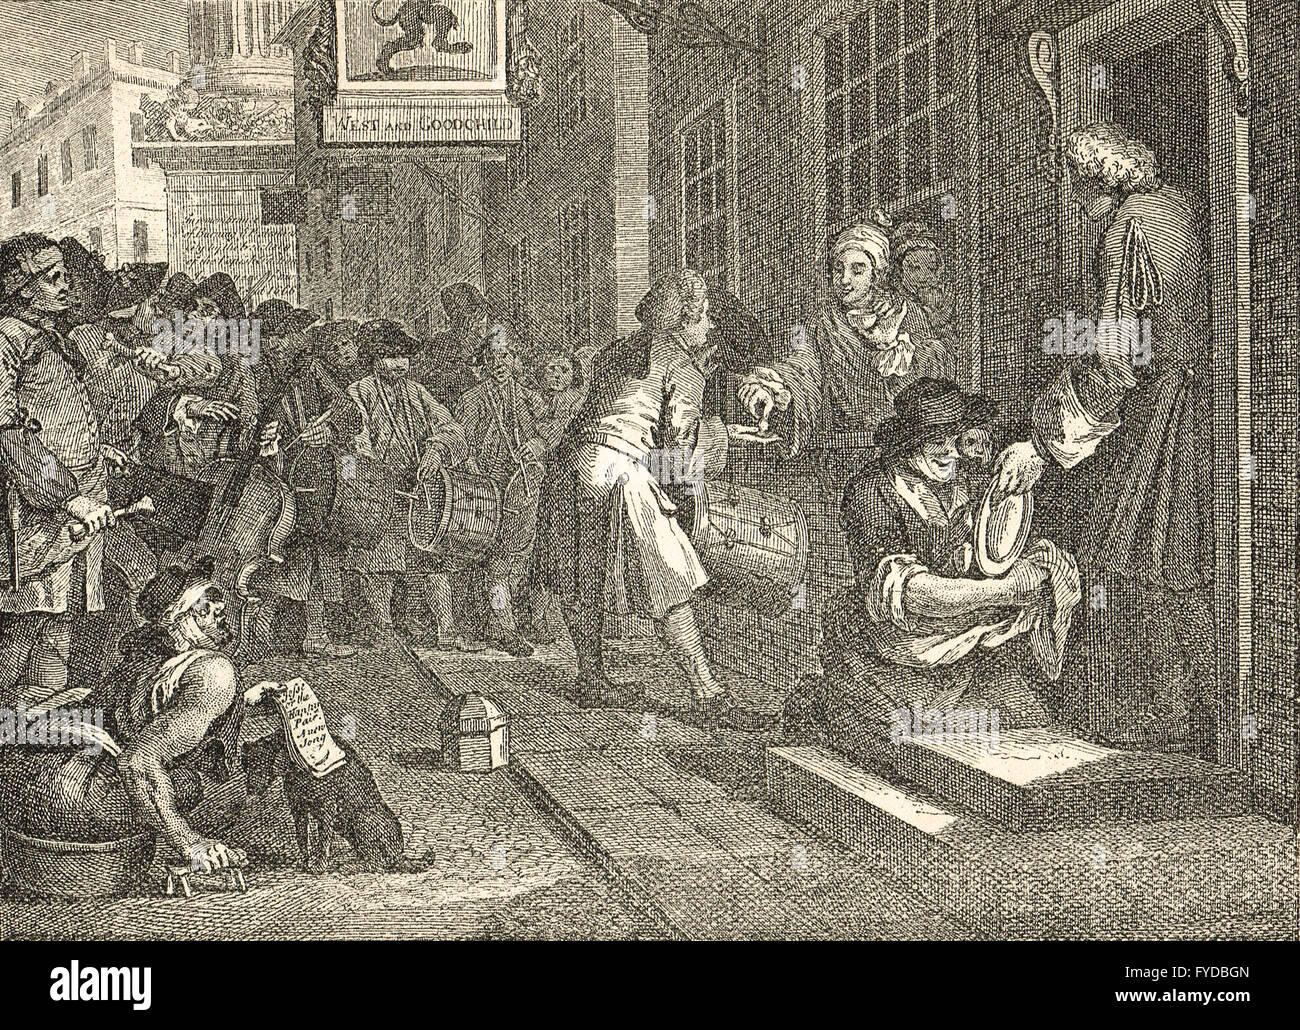 Industry & Idleness Plate 6 The Industrious 'Prentice out of his Time, & Married to his Master's Daughter by William Hogarth circa 1747 Stock Photo